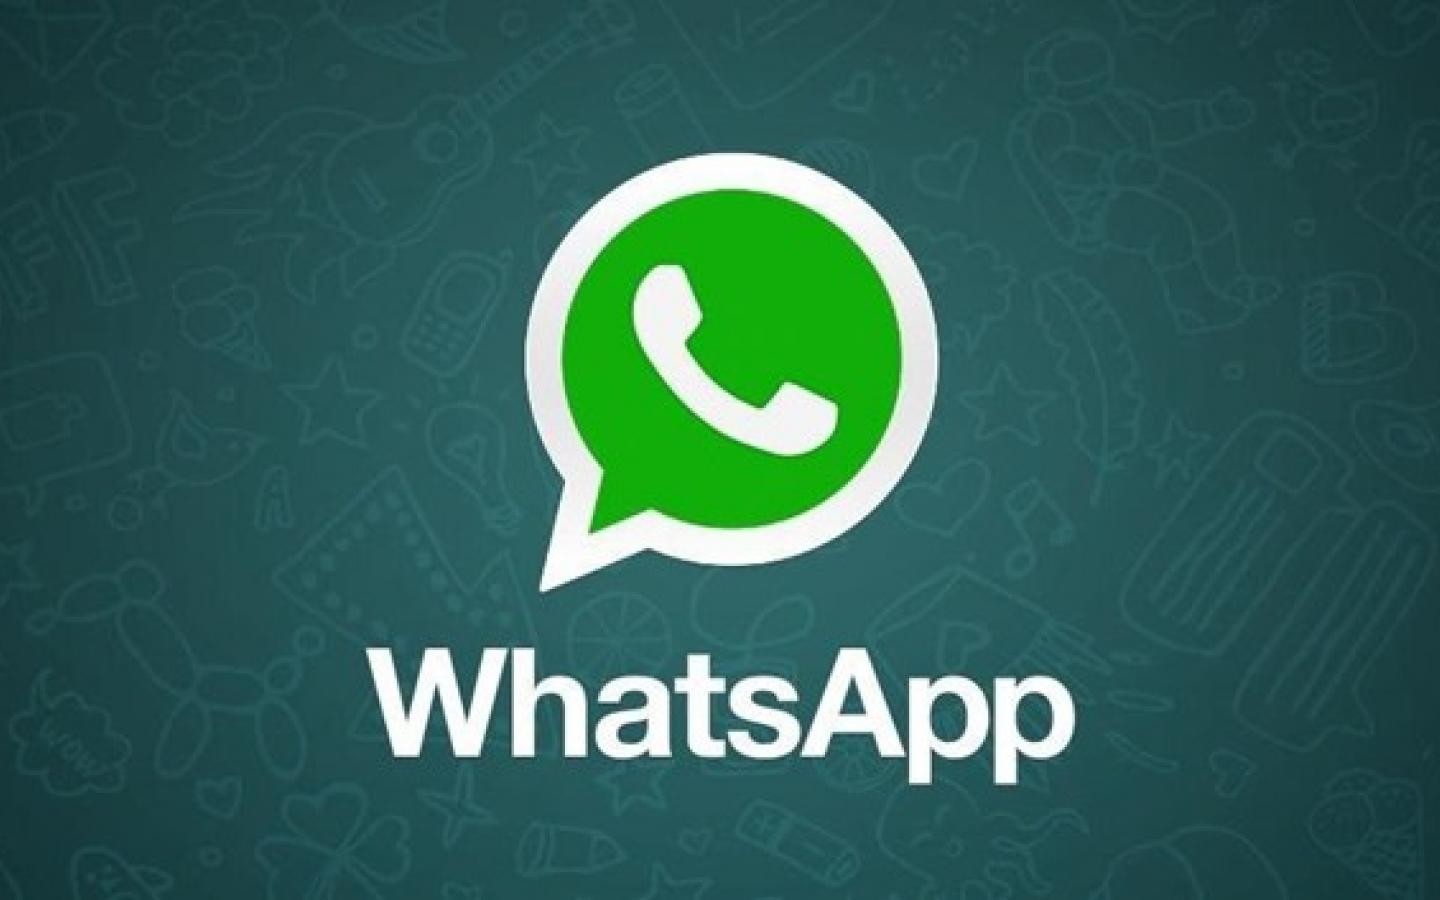 WhatsApp was breached: Here's what users need to do